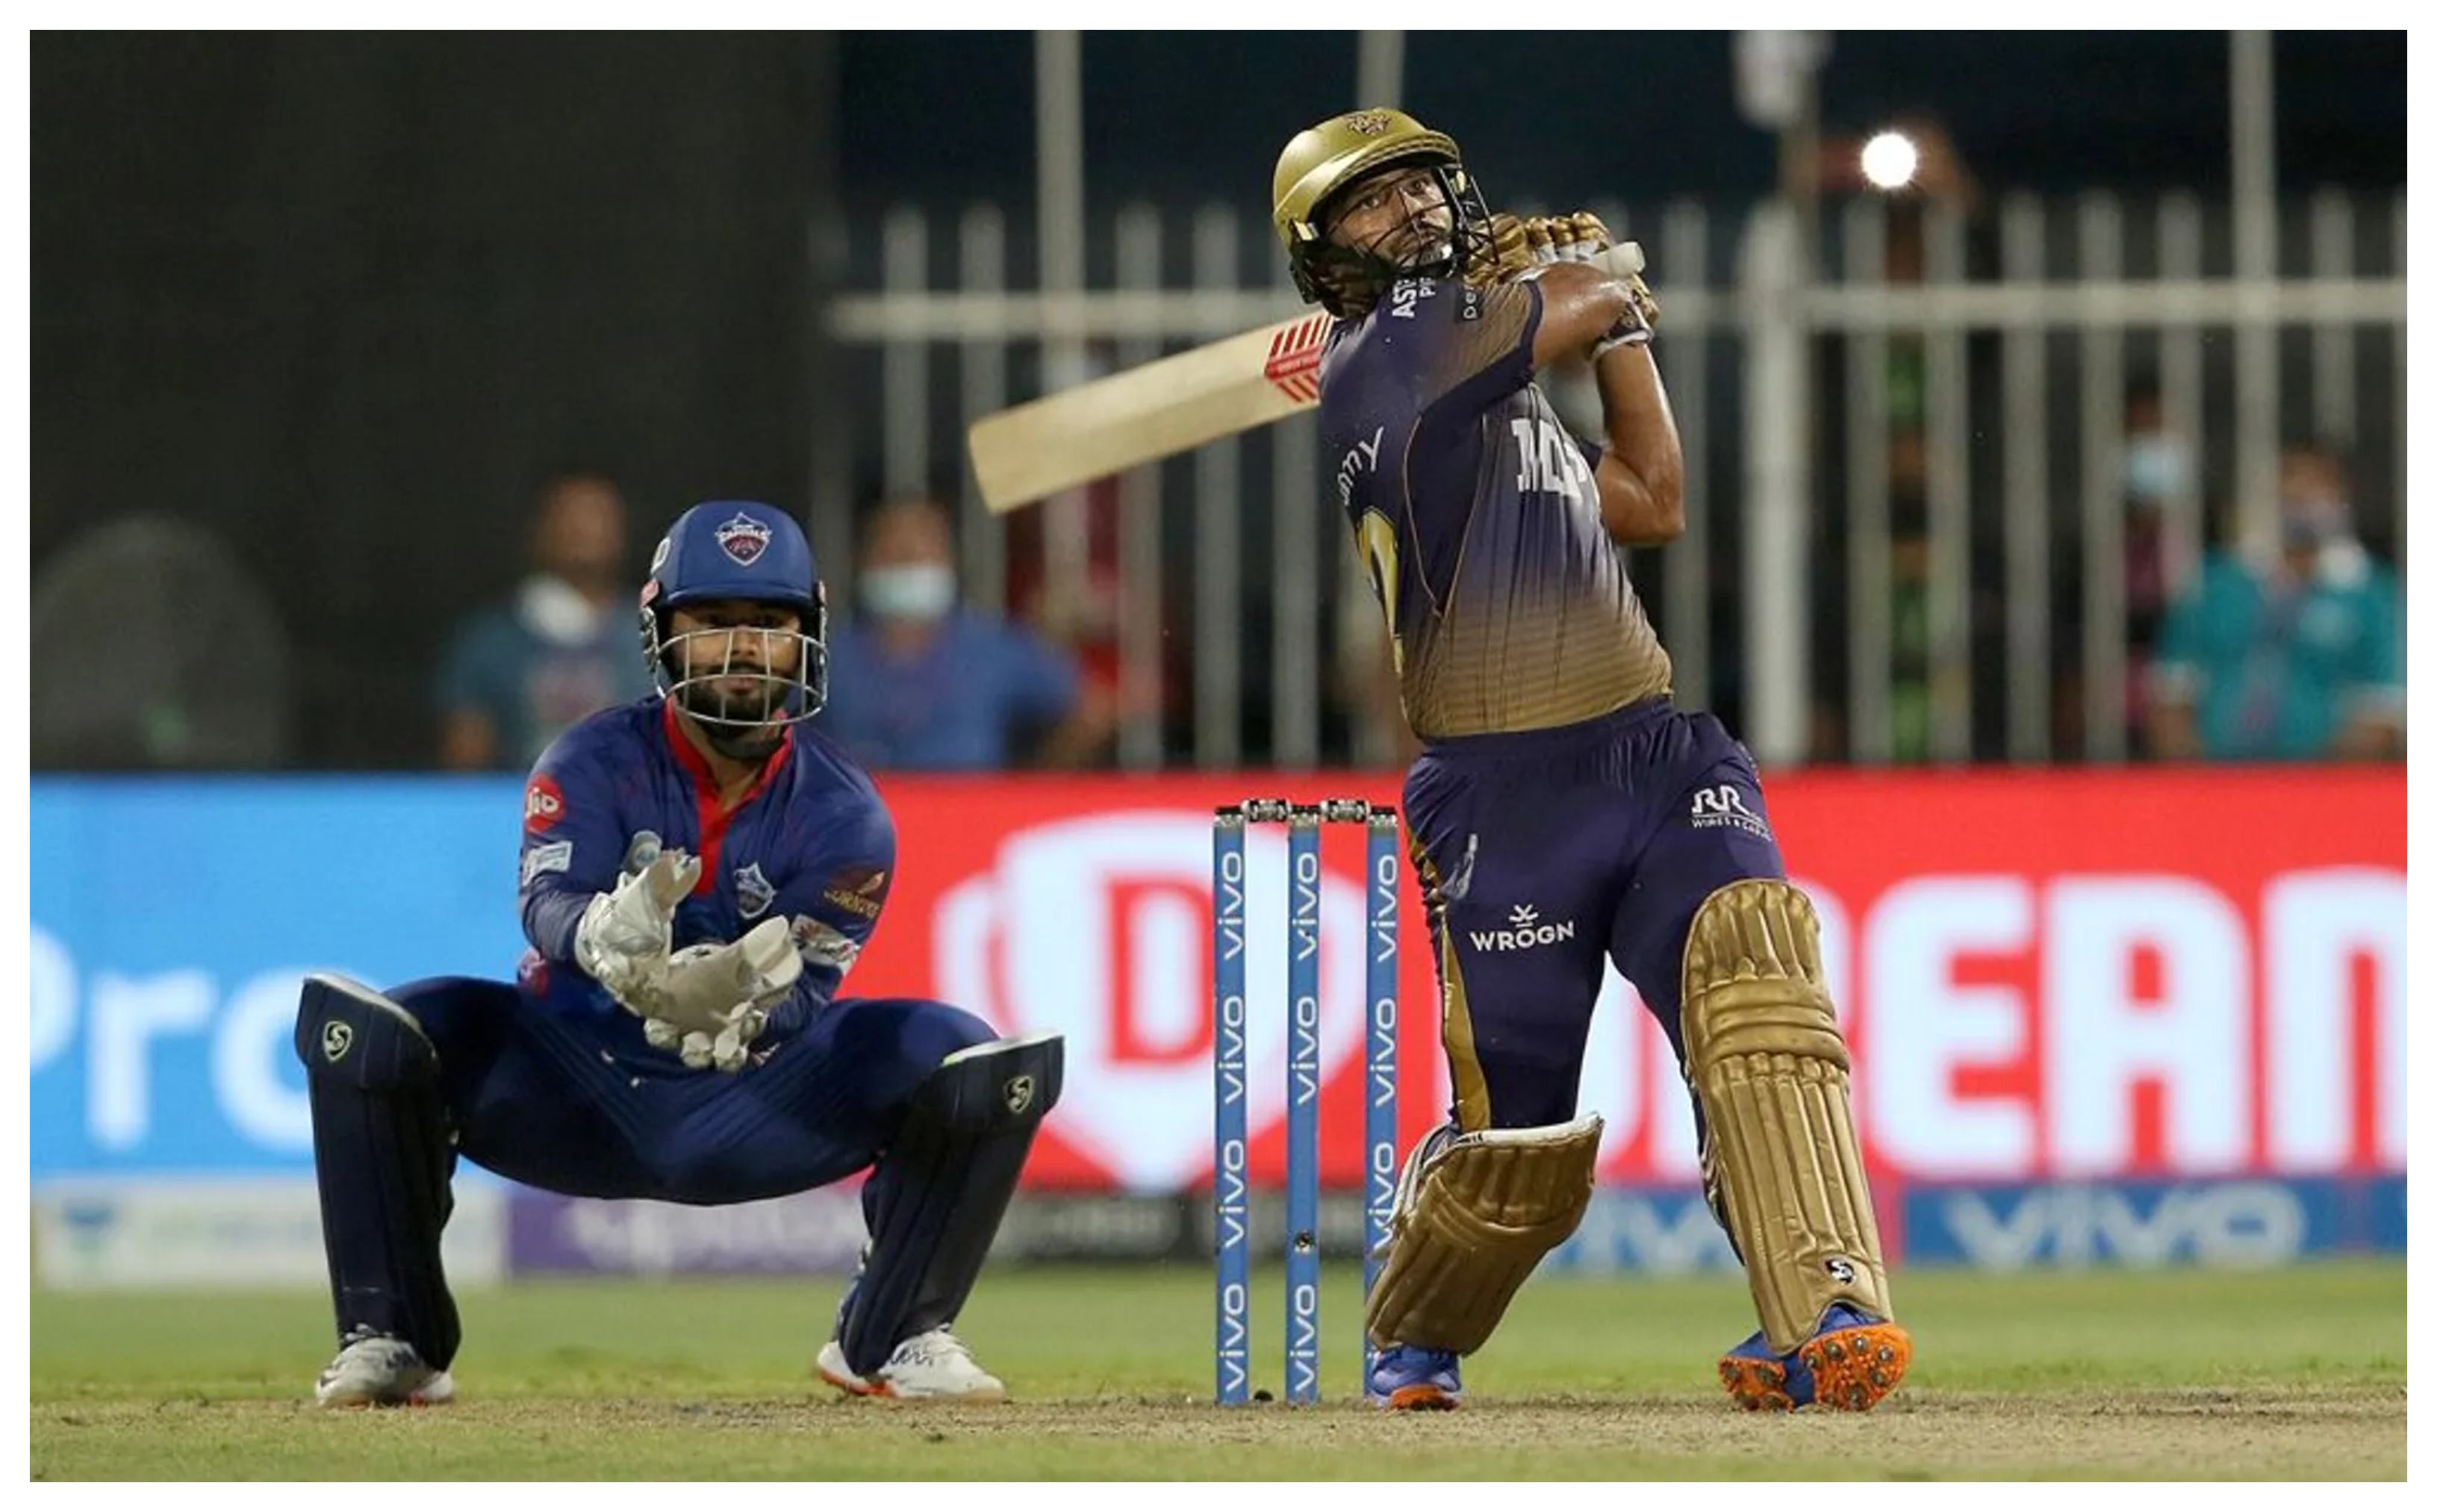 Rahul Tripathi hit a six on the penultimate ball to win the contest for KKR | BCCI/IPL